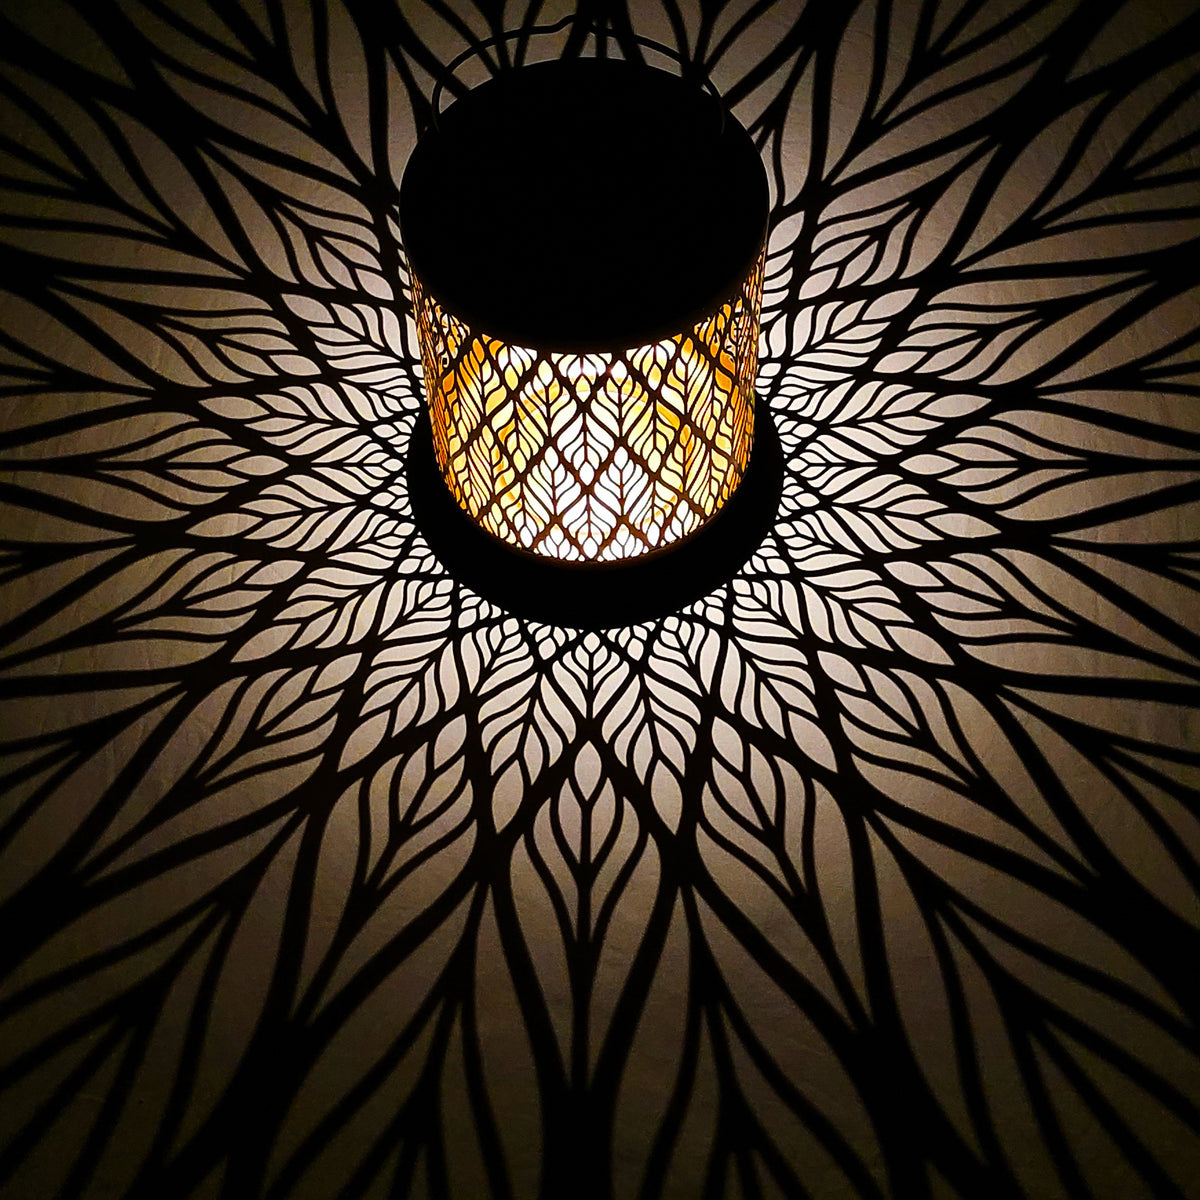 Bliss Outdoors 12-inch Tall Hanging and Tabletop Decorative Solar LED Lantern with Unique Diamond Leaf Design turned on and creating a cool pattern of light on the surface around it.